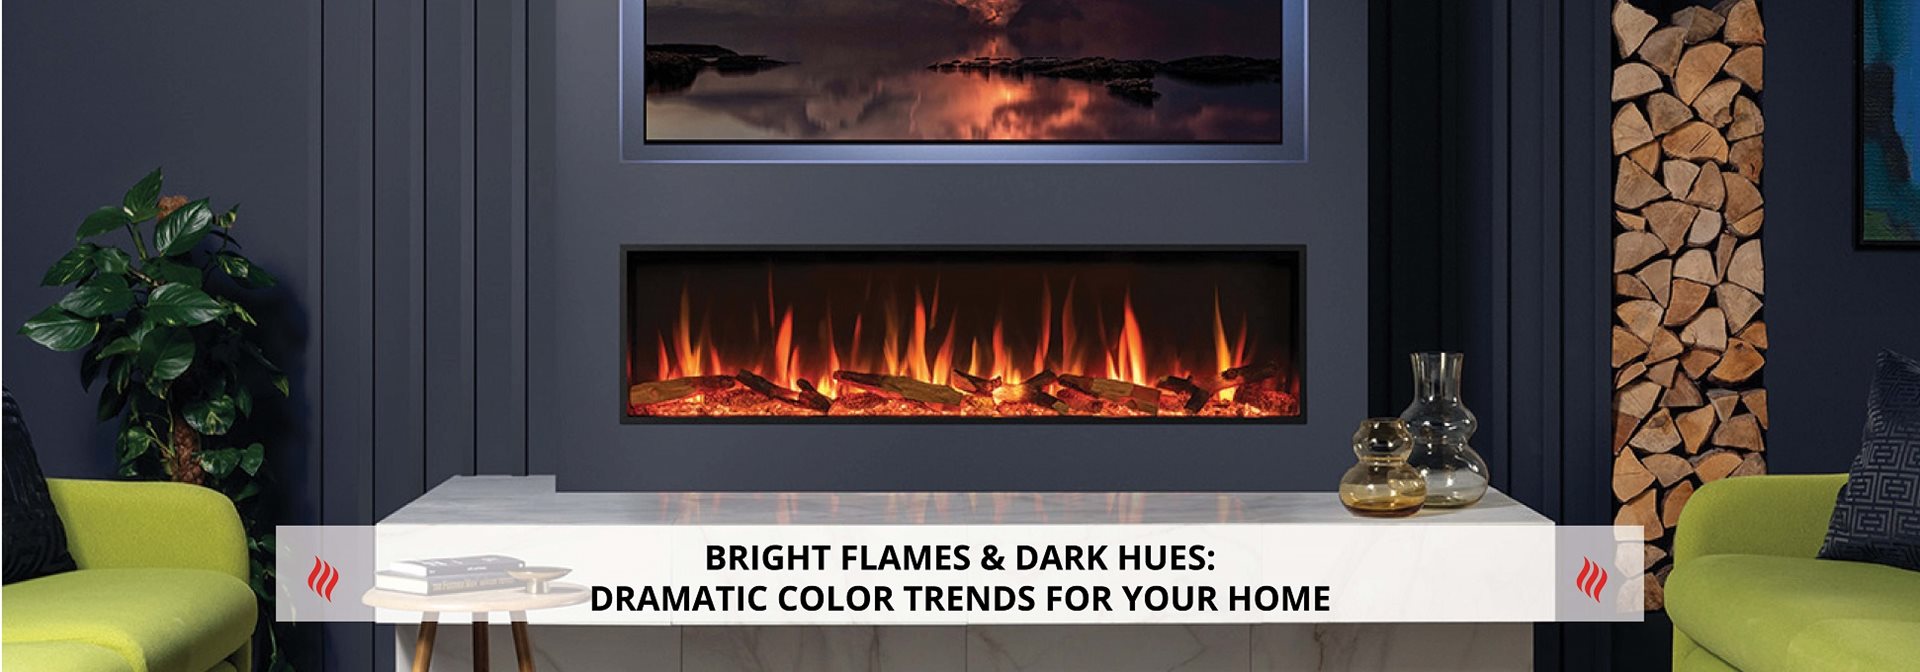 Bright Flames & Dark Hues: Dramatic Color Trends for Your Home  